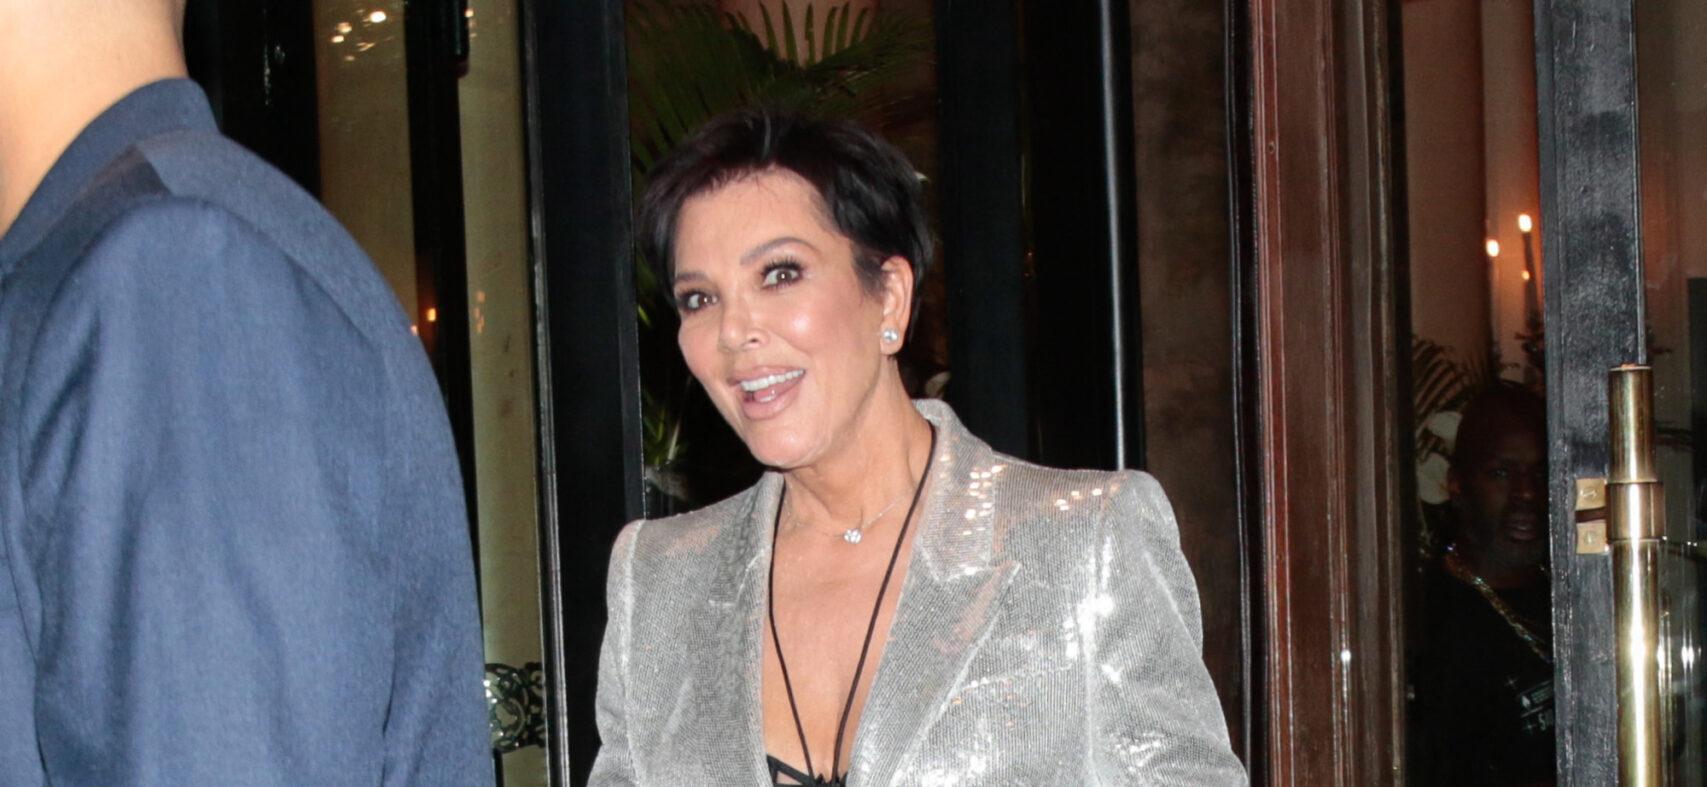 Kris Jenner and Corey Gamble leaving Beyonce after party in Paris